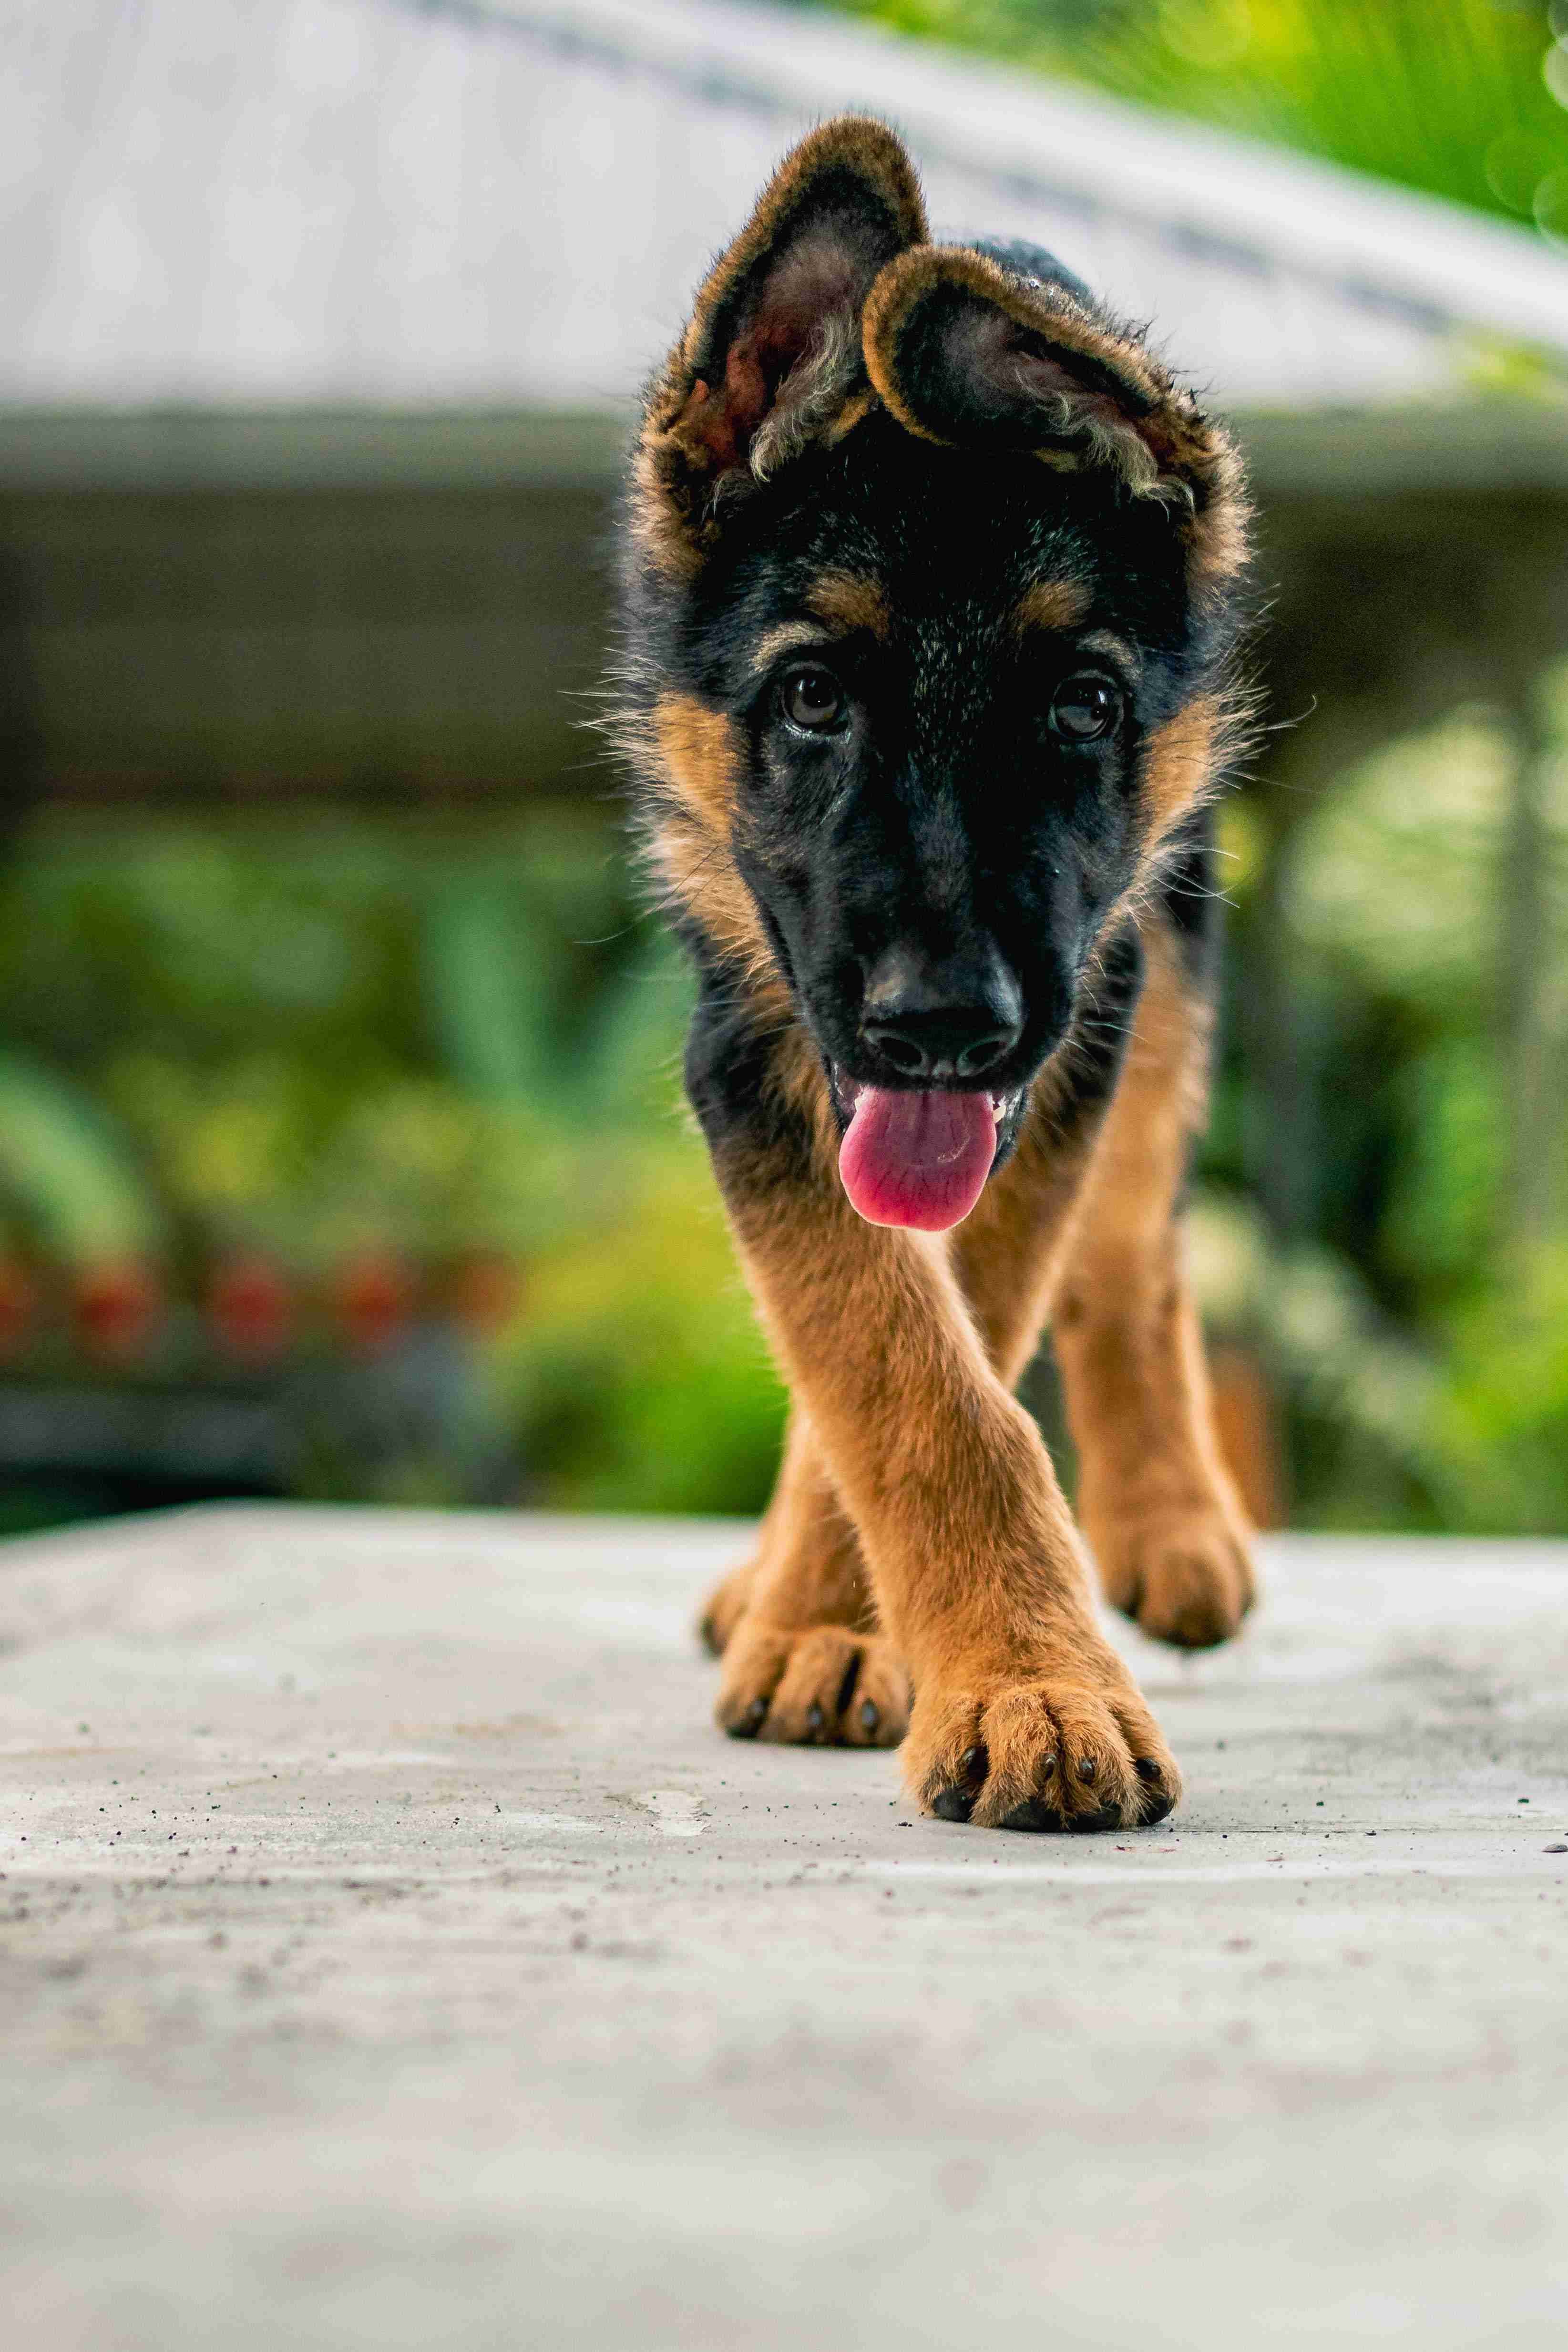 Can a German Shepherd be trained to live in an apartment without accidents?